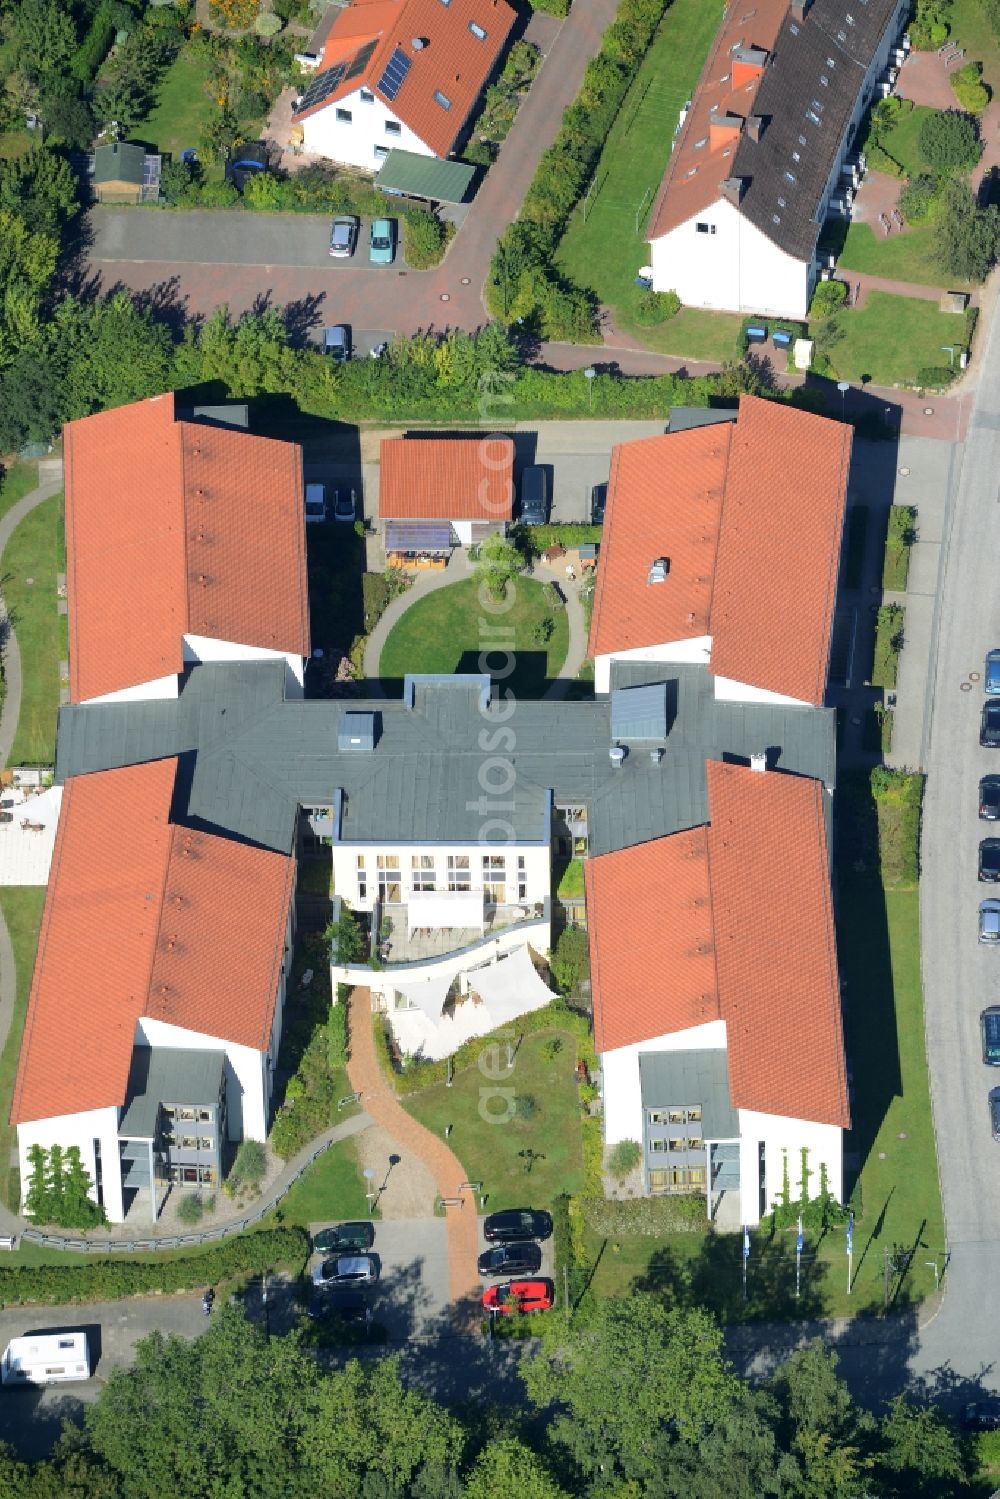 Kiel from the bird's eye view: Retirement and elderly care home Haus am Holunderbusch in Kiel in the state of Schleswig-Holstein. The home with its distinct architecture is located in a residential area in the Hassee part of the town